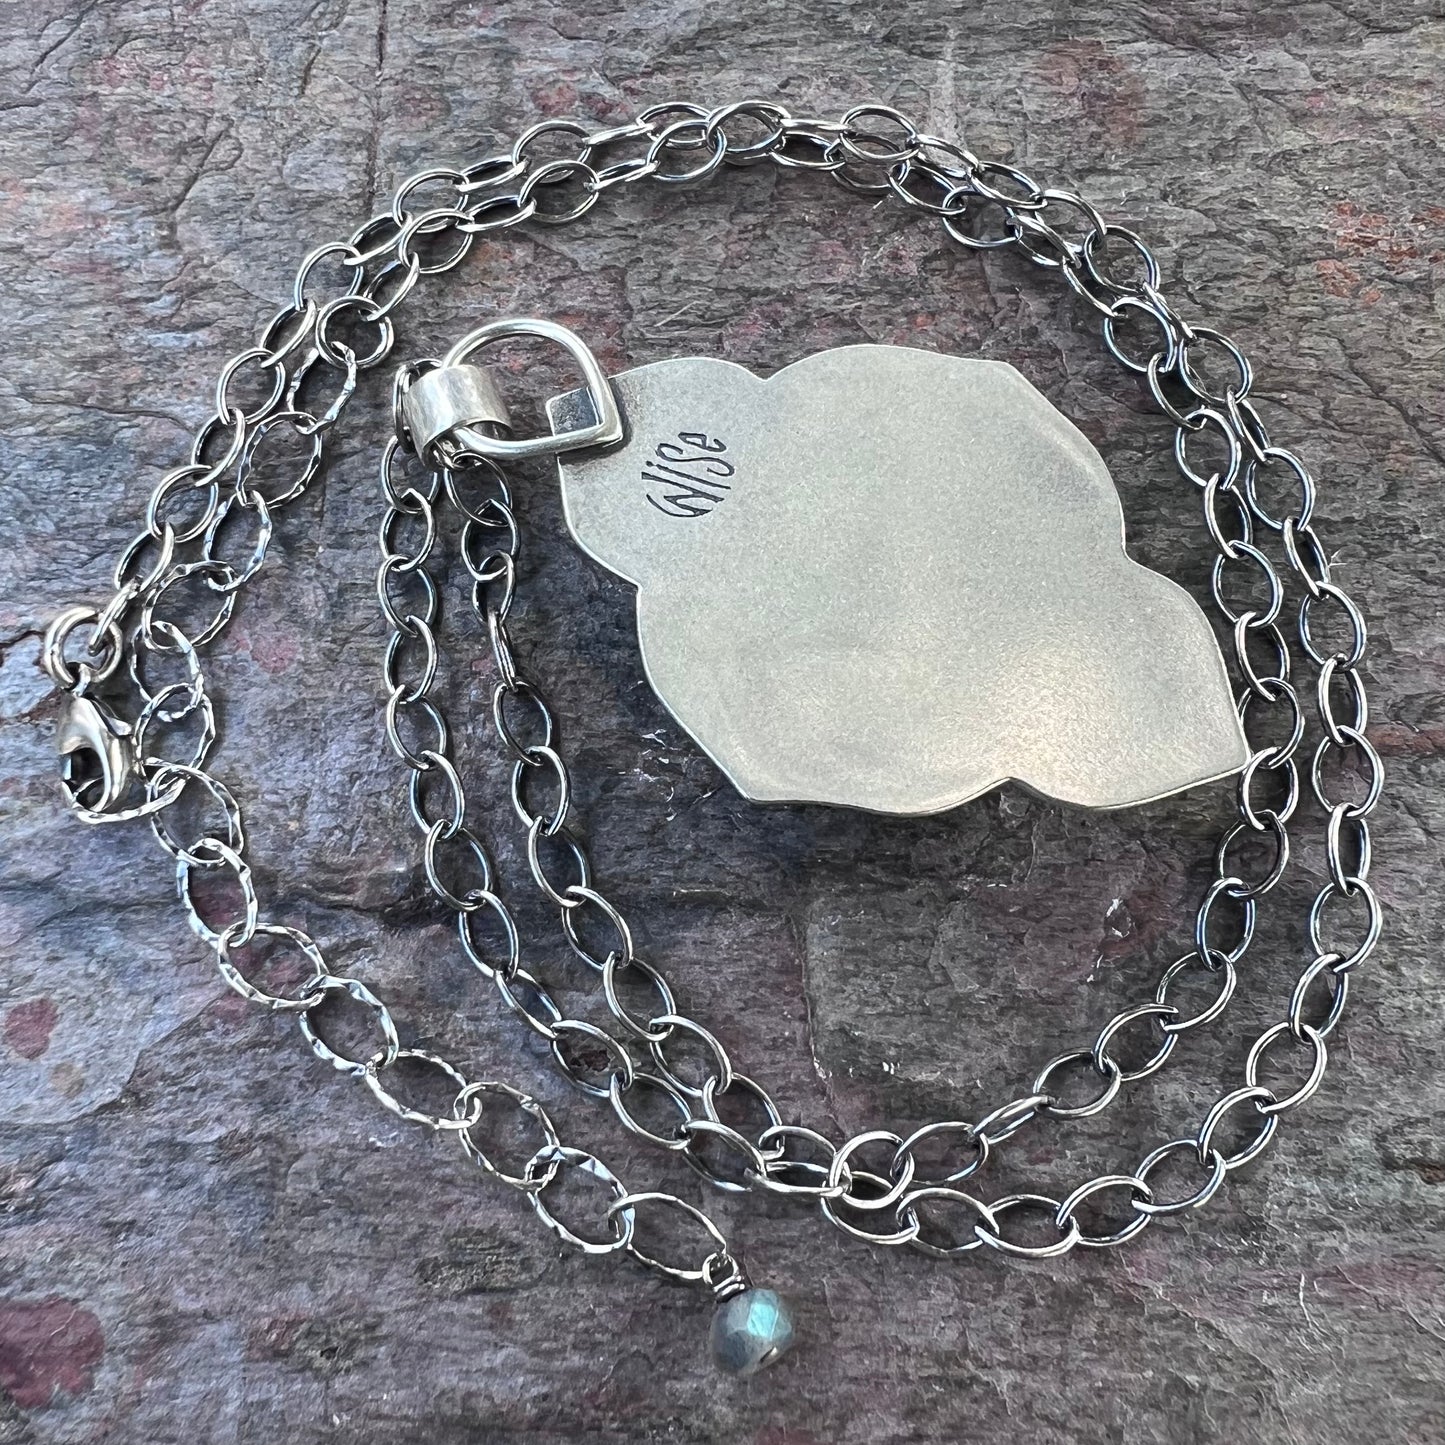 Labradorite and Agate Druzy Sterling Silver Necklace - One-of-a-Kind Handmade Pendant on Sterling Silver Chain